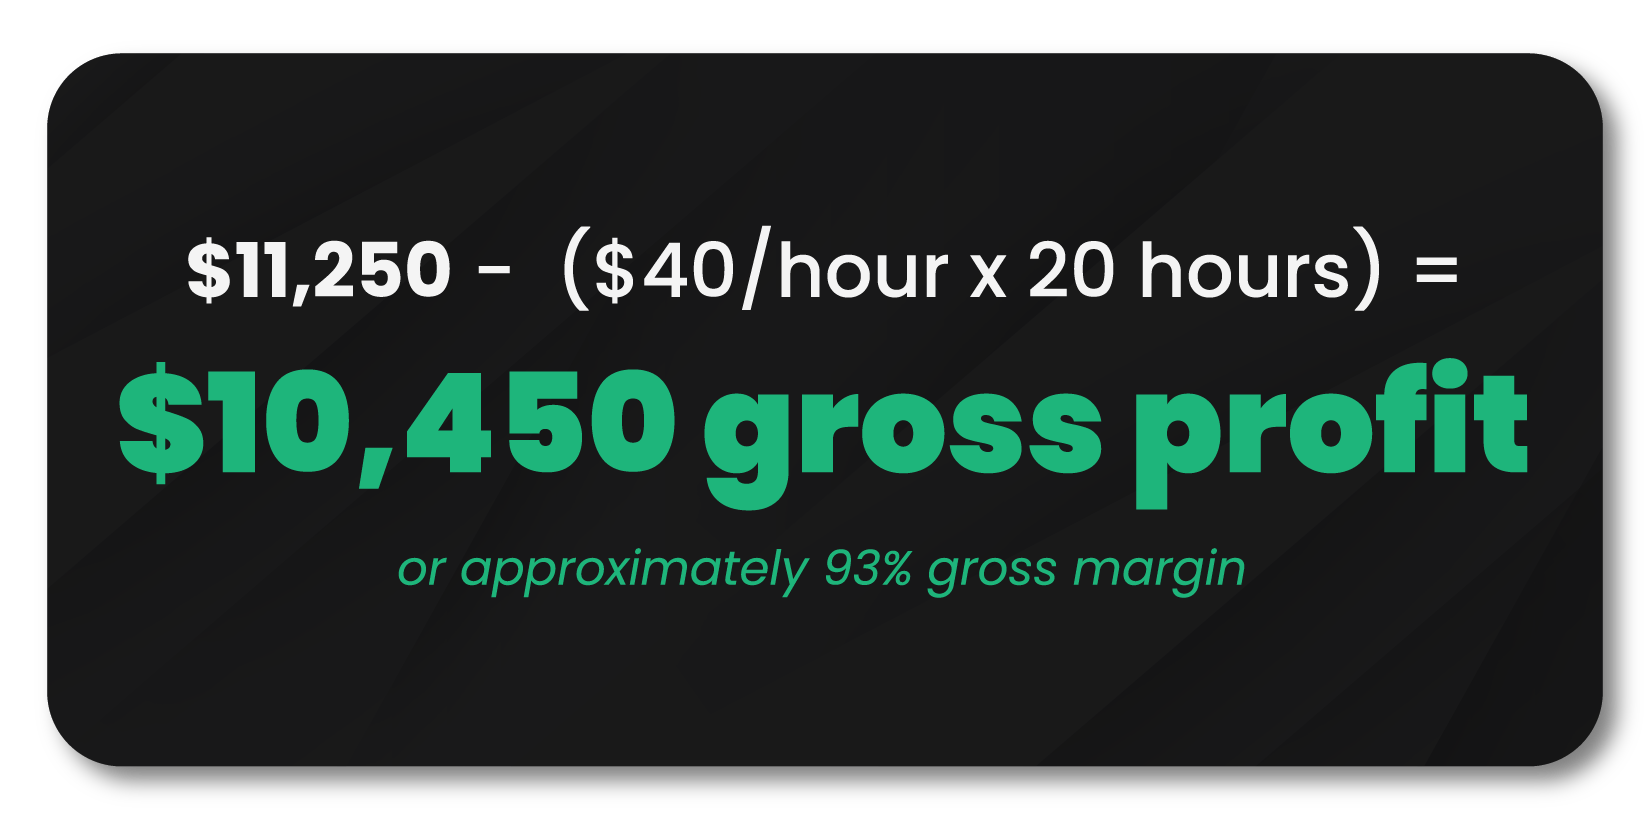 $11,250 - ($40/hour x 20 hours) = $10,450 gross profit or approximately 93% gross margin